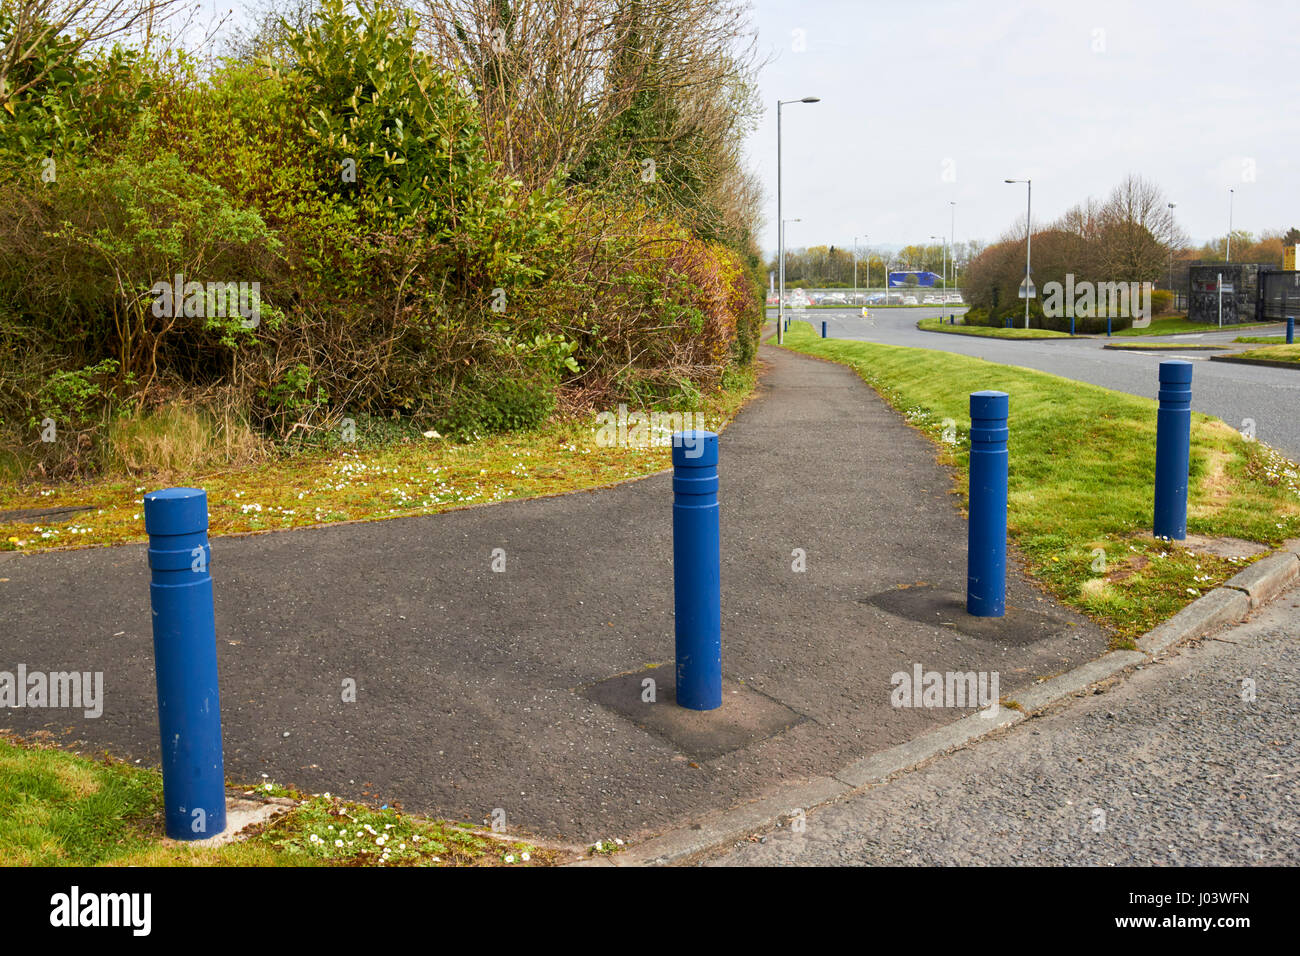 security bollards and grass earth berm protecting footpath in secure commercial area Newtownabbey UK these installations were common designs in the tr Stock Photo